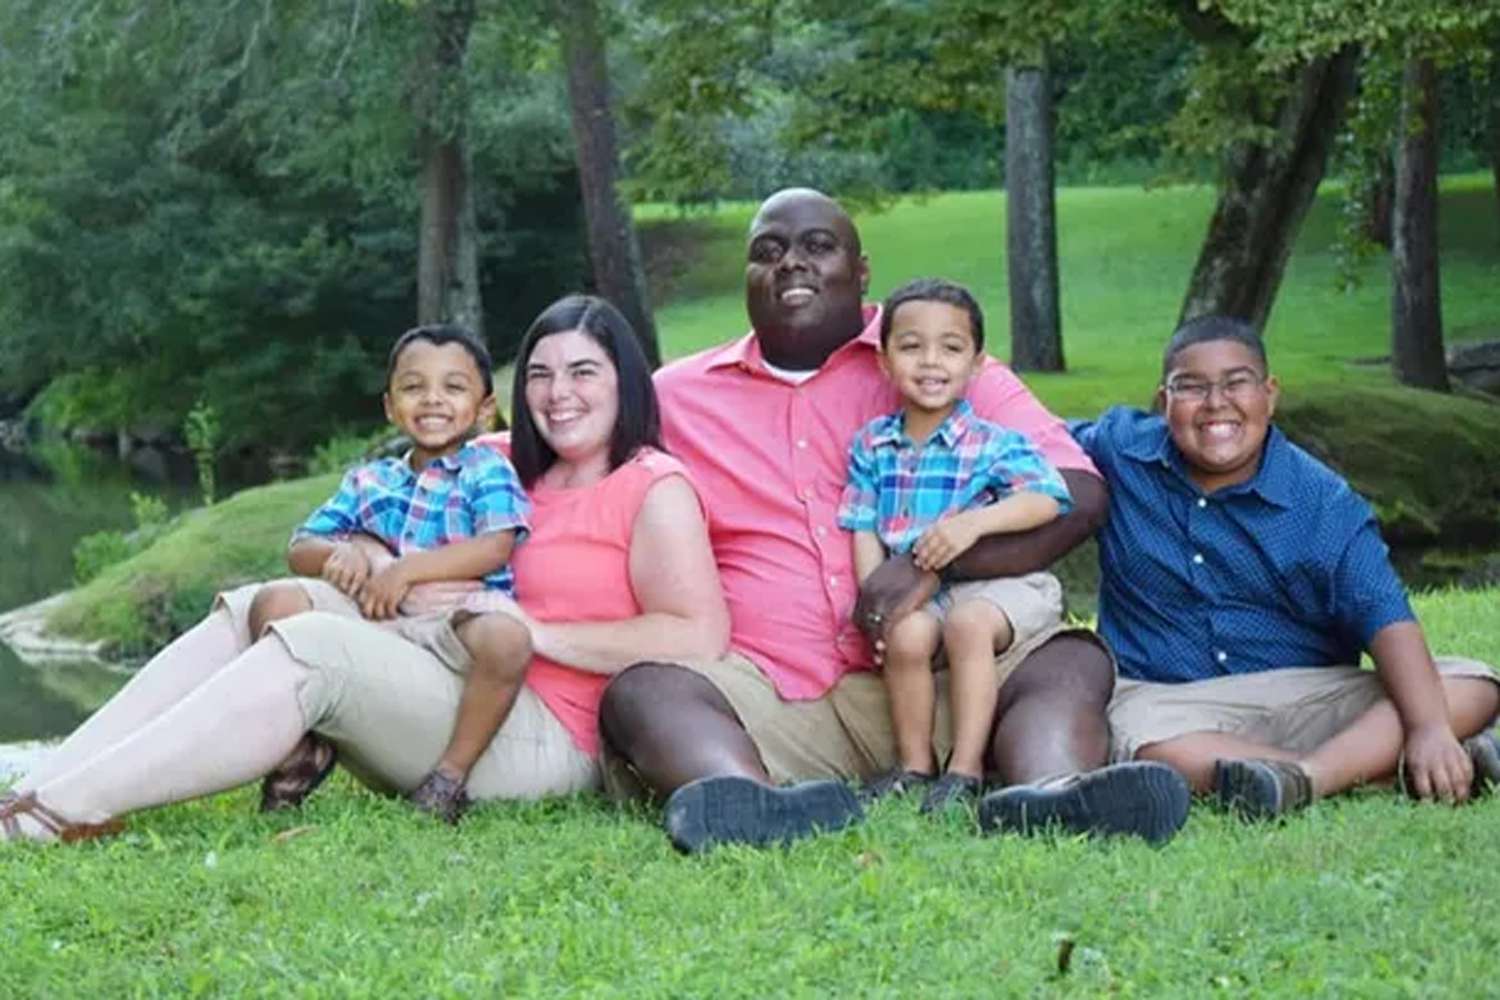 Georgia Boy Released from Hospital After Car Crash Kills His 2 Brothers and Parents: 'God Blessed Us'